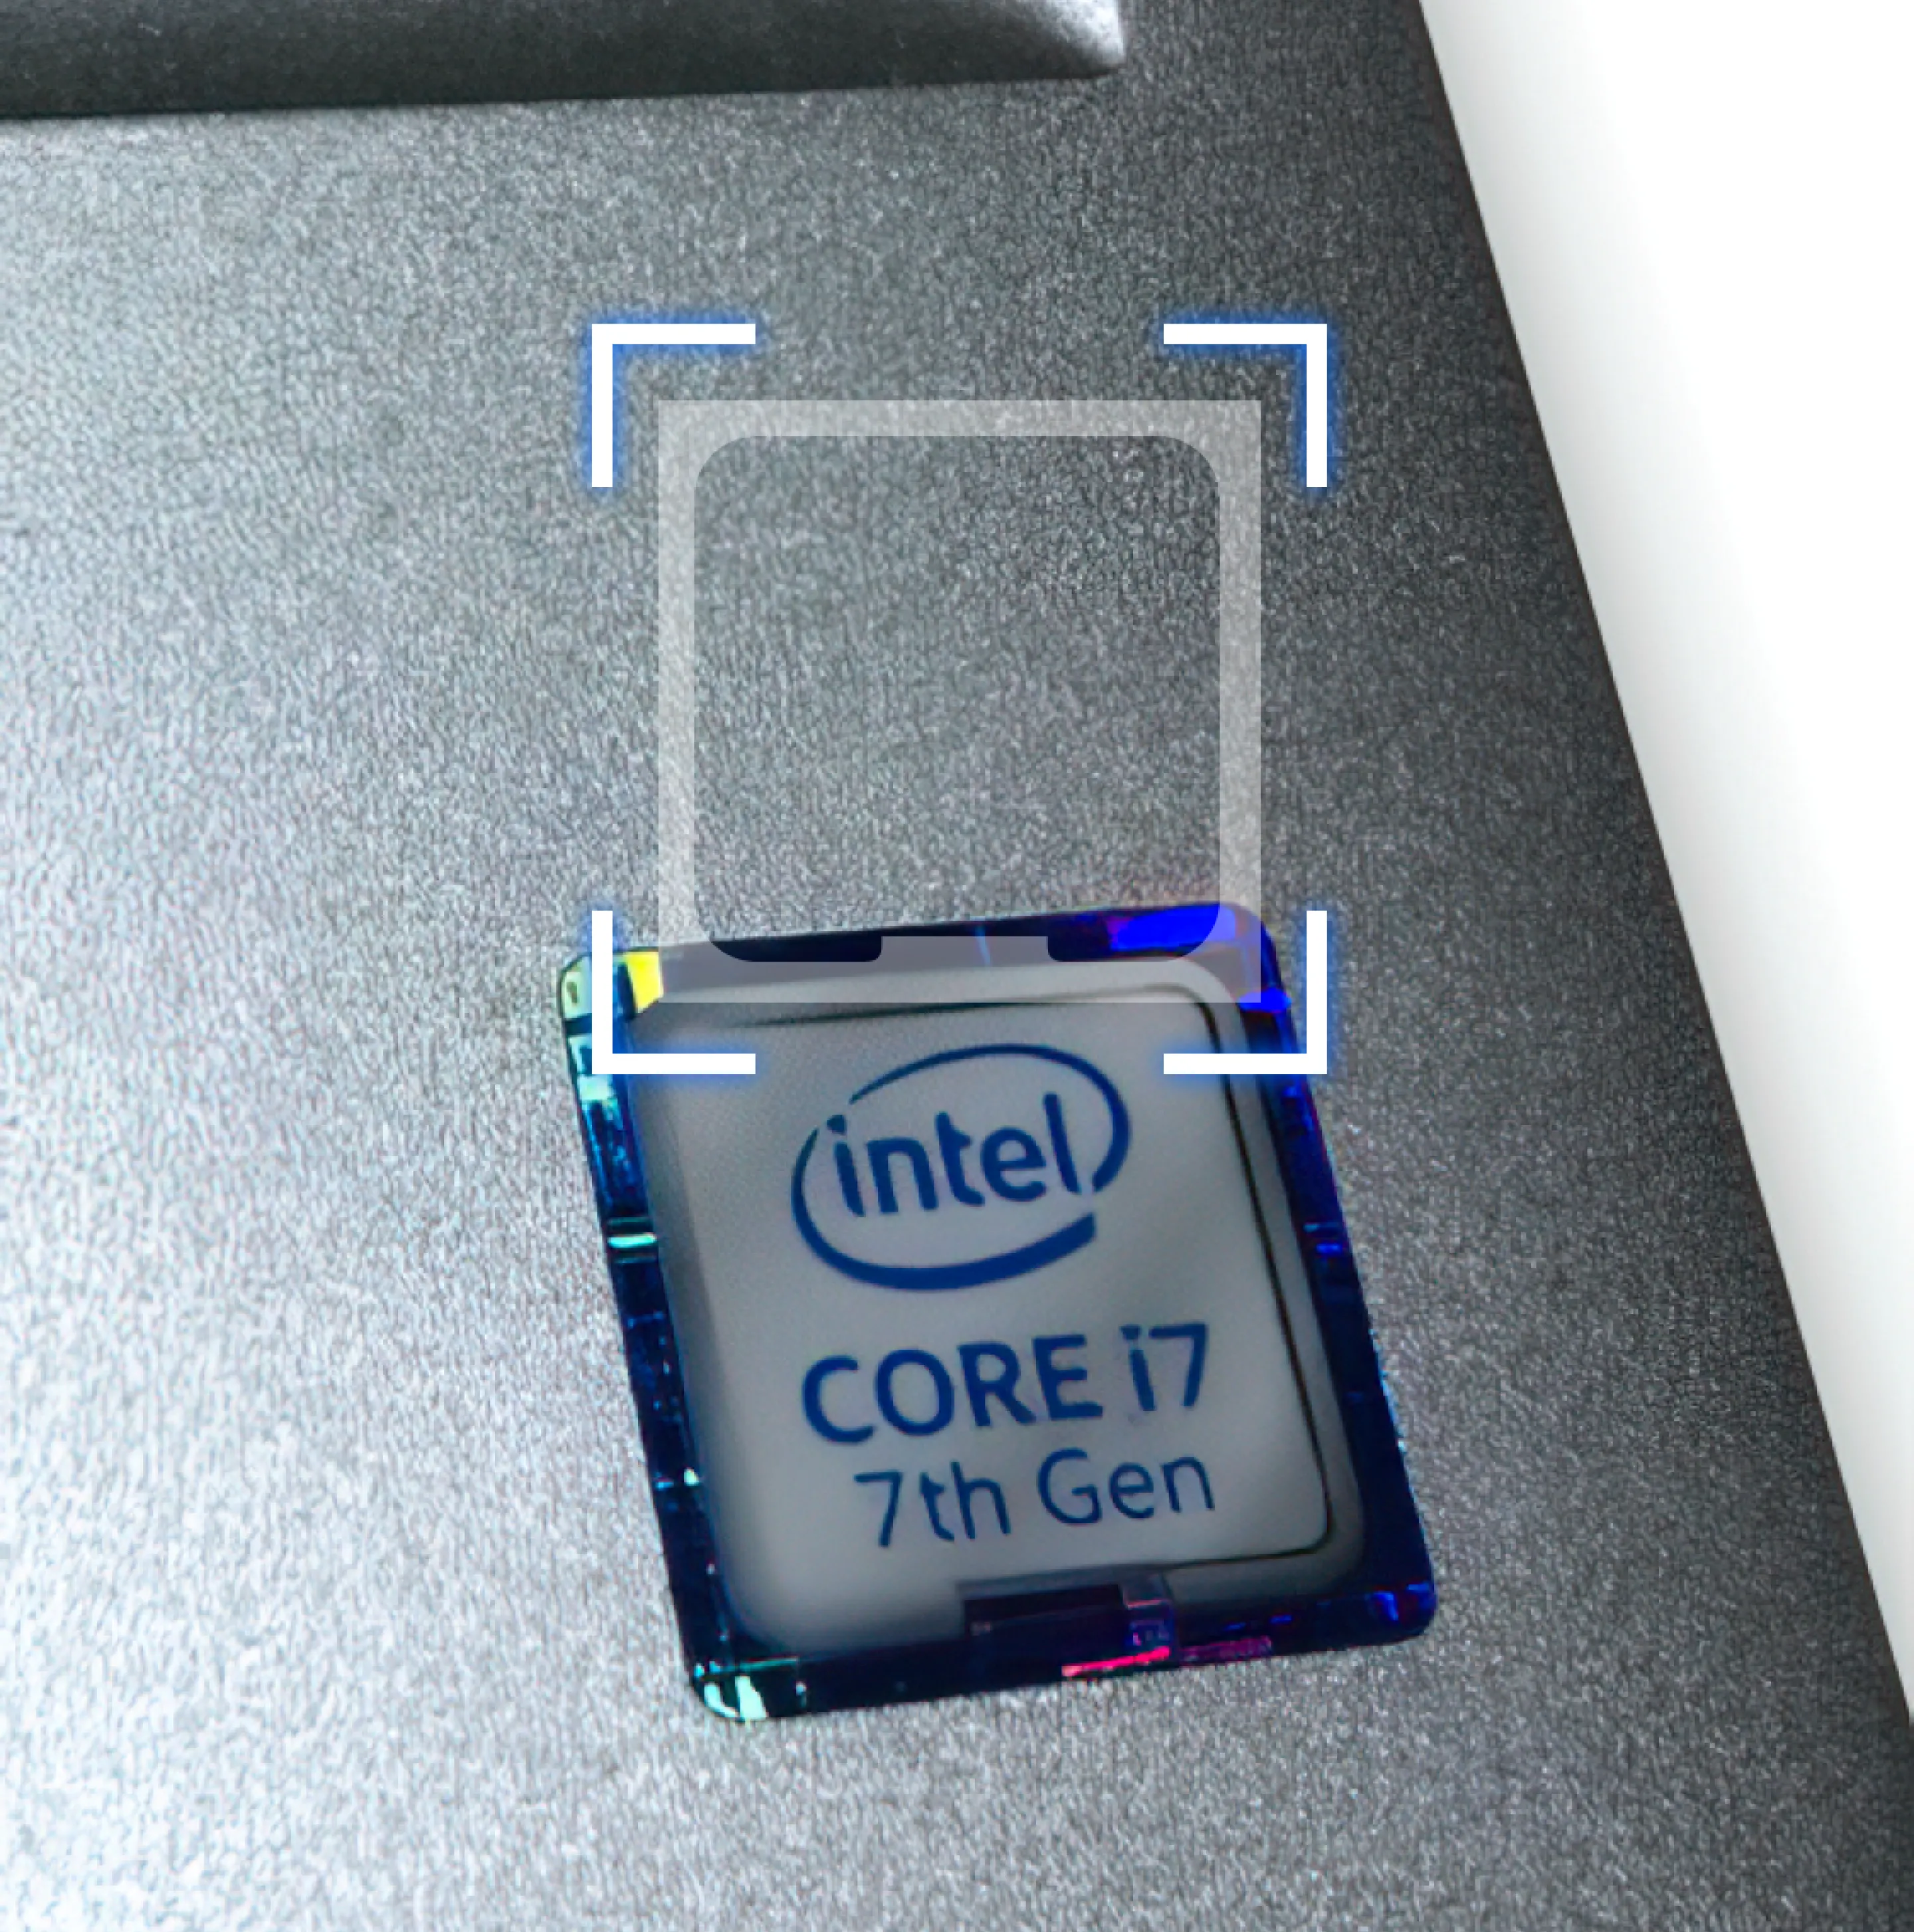 Screenshot of the app’s badge scanning feature showing the camera pointed at an Intel Core i7 7th Gen Badge